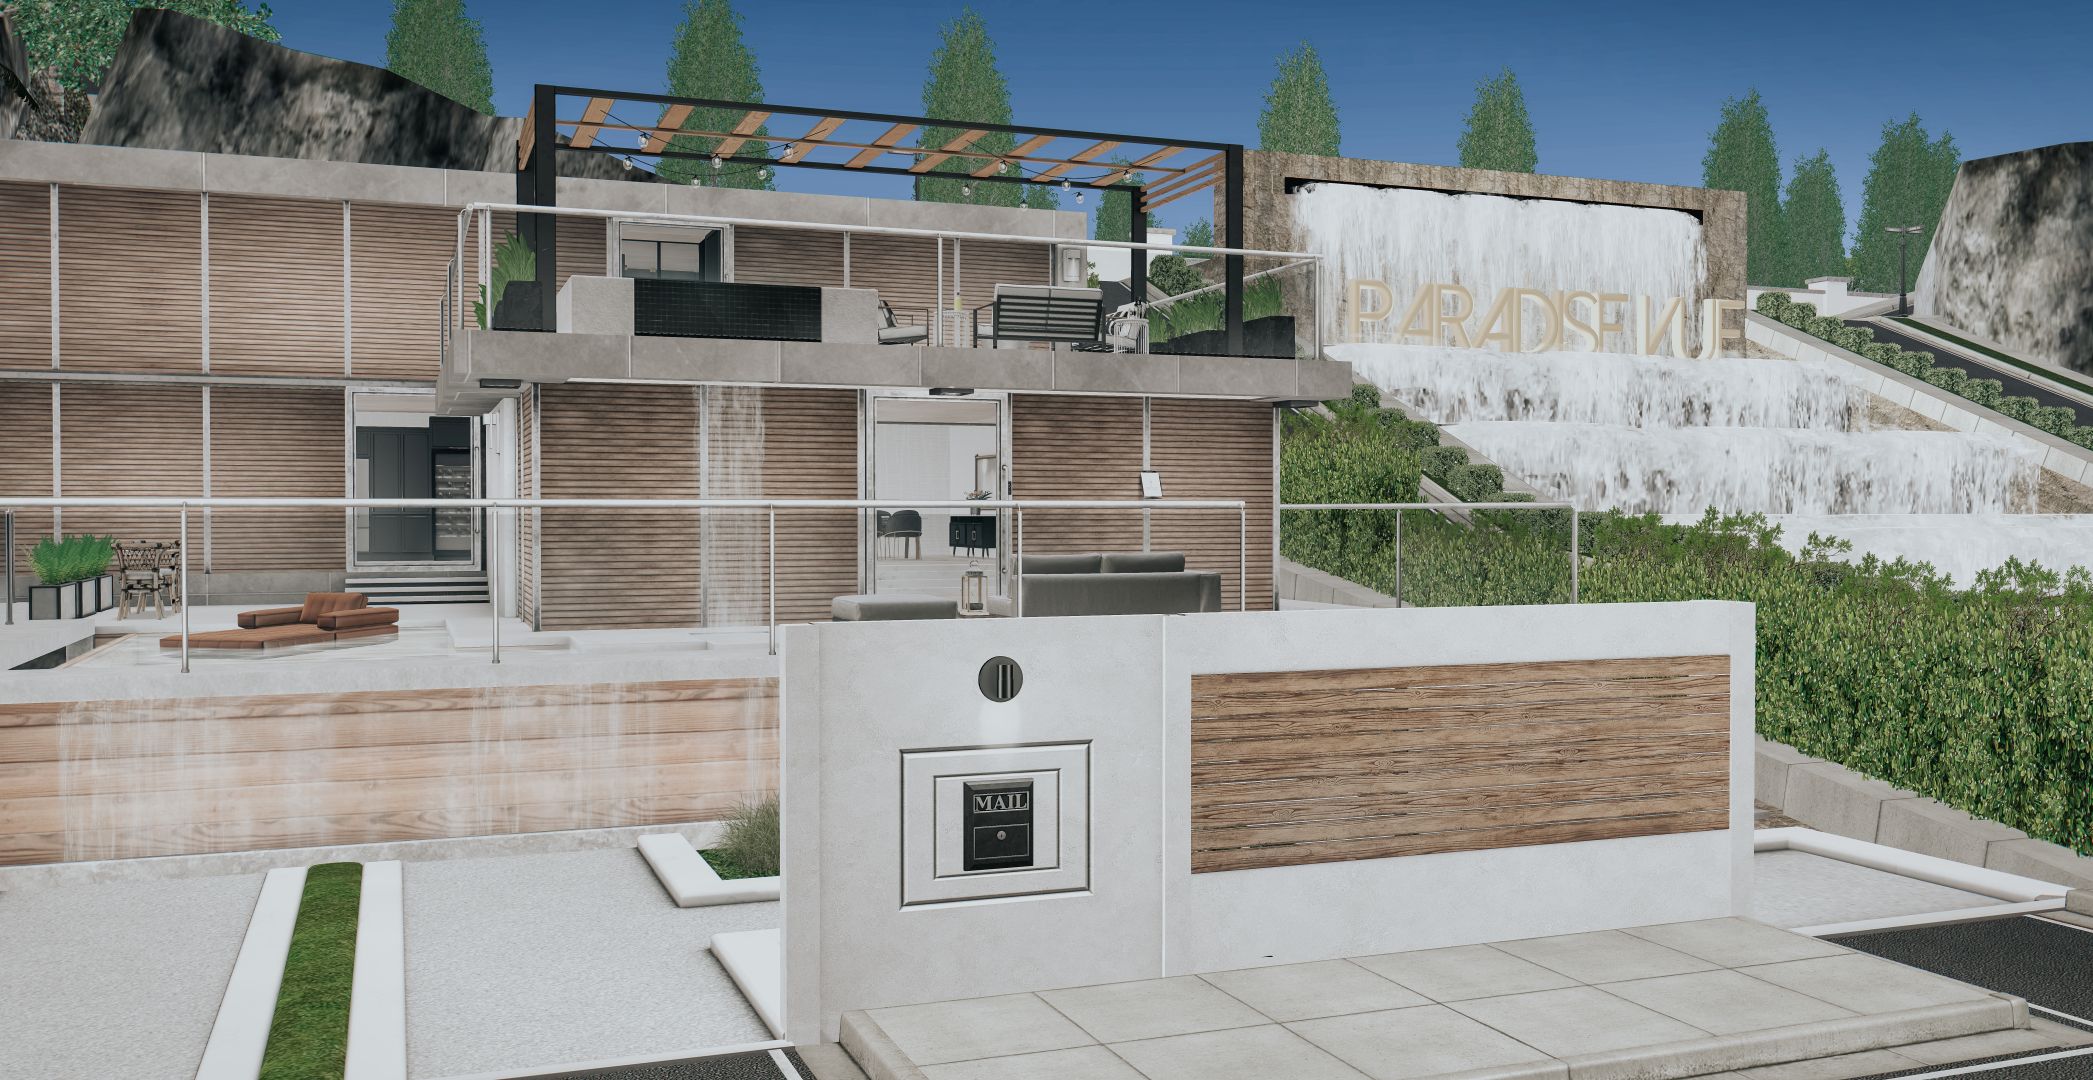 The Lookout - 100 prims - L$1399/week